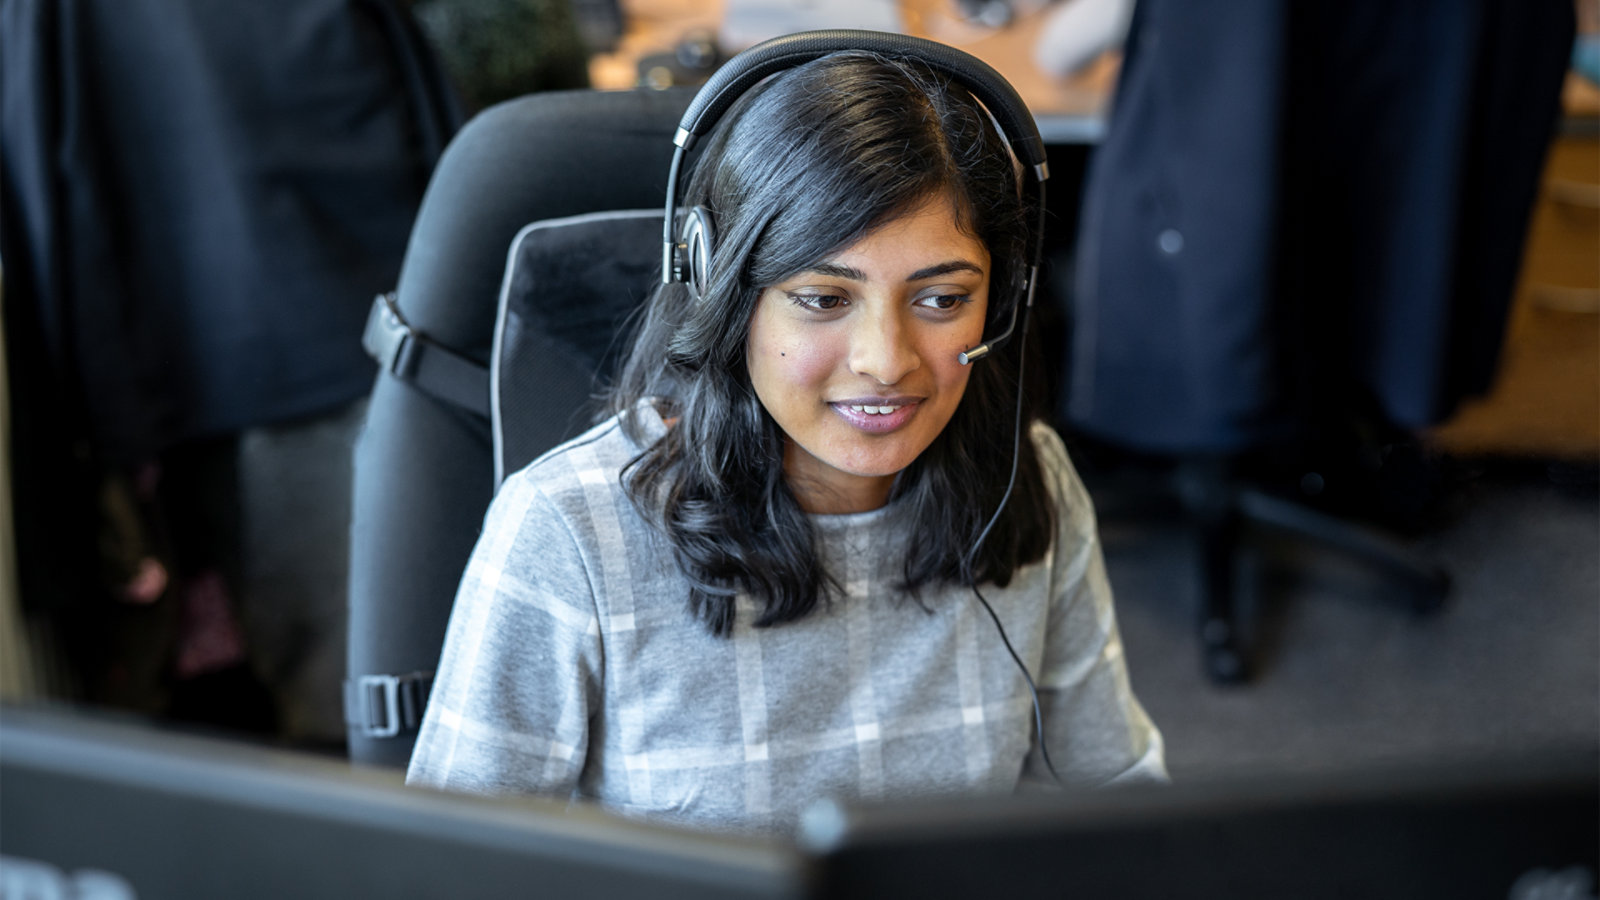  A Microsoft product expert talks to a customer while wearing a headset.